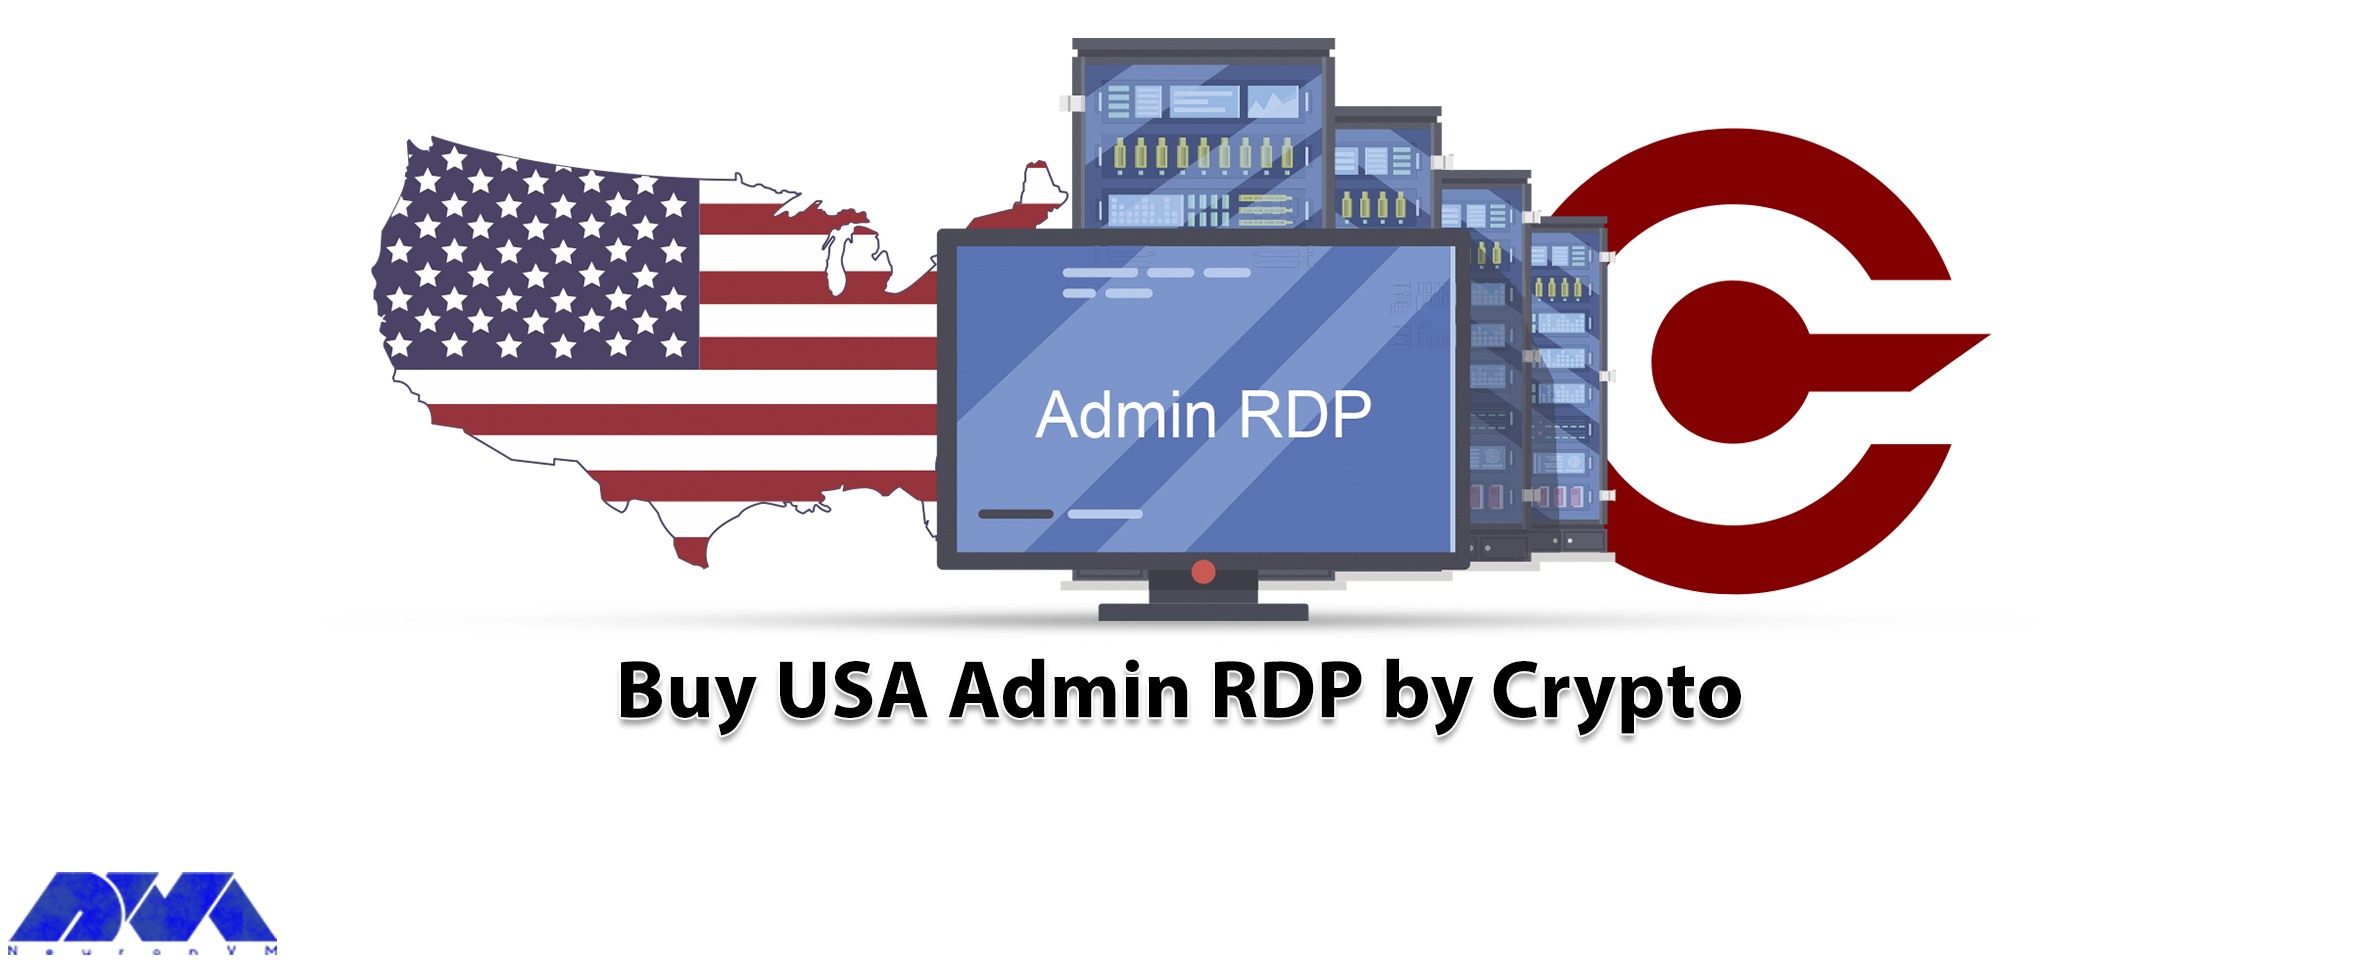 How to Buy USA Admin RDP by Crypto - NeuronVM